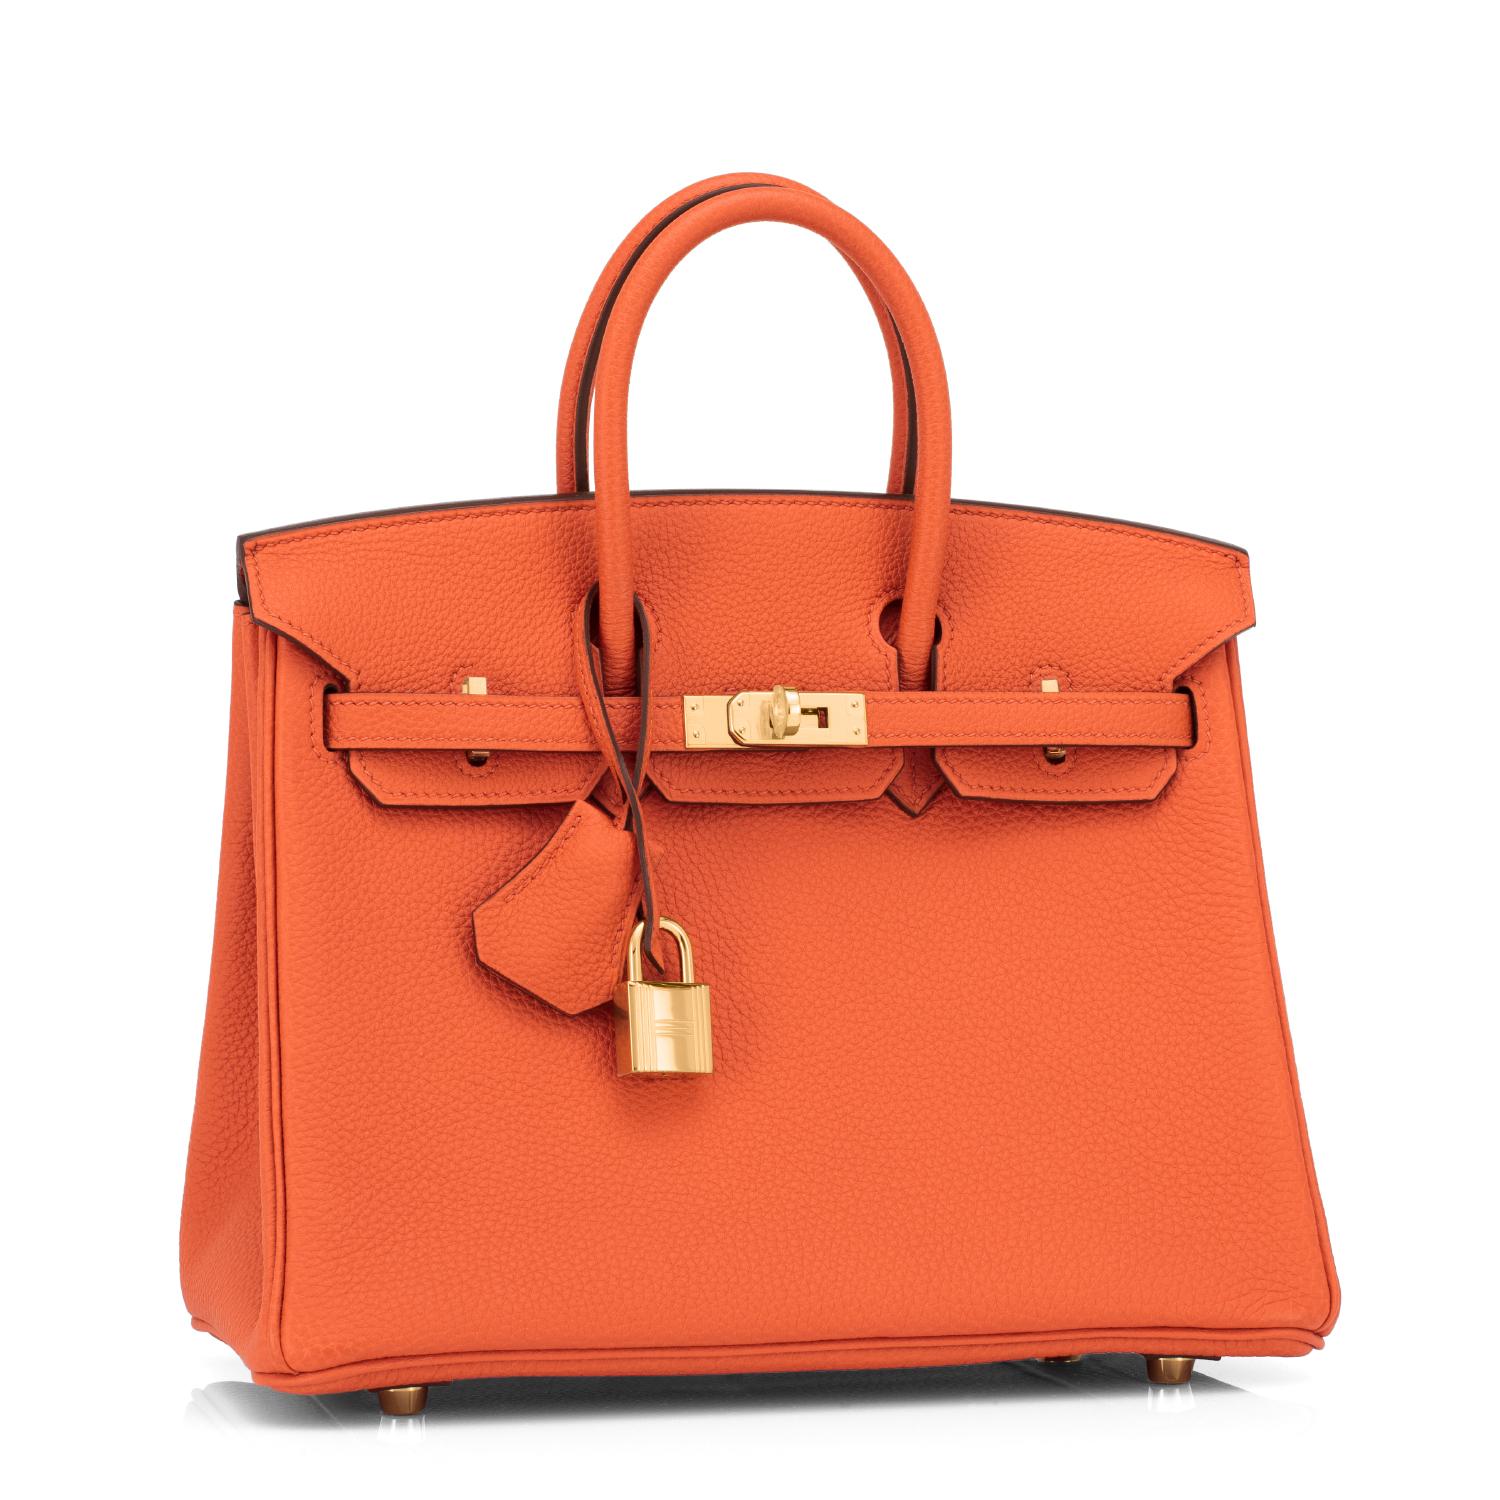 Guaranteed Authentic Hermes Classic Orange Baby Birkin 25cm Togo Gold Hardware
New or Never Used. Perfect gift! Pristine Condition (with plastic on hardware)
Comes full set with keys, lock, clochette, a sleeper for the bag, rain protector, and